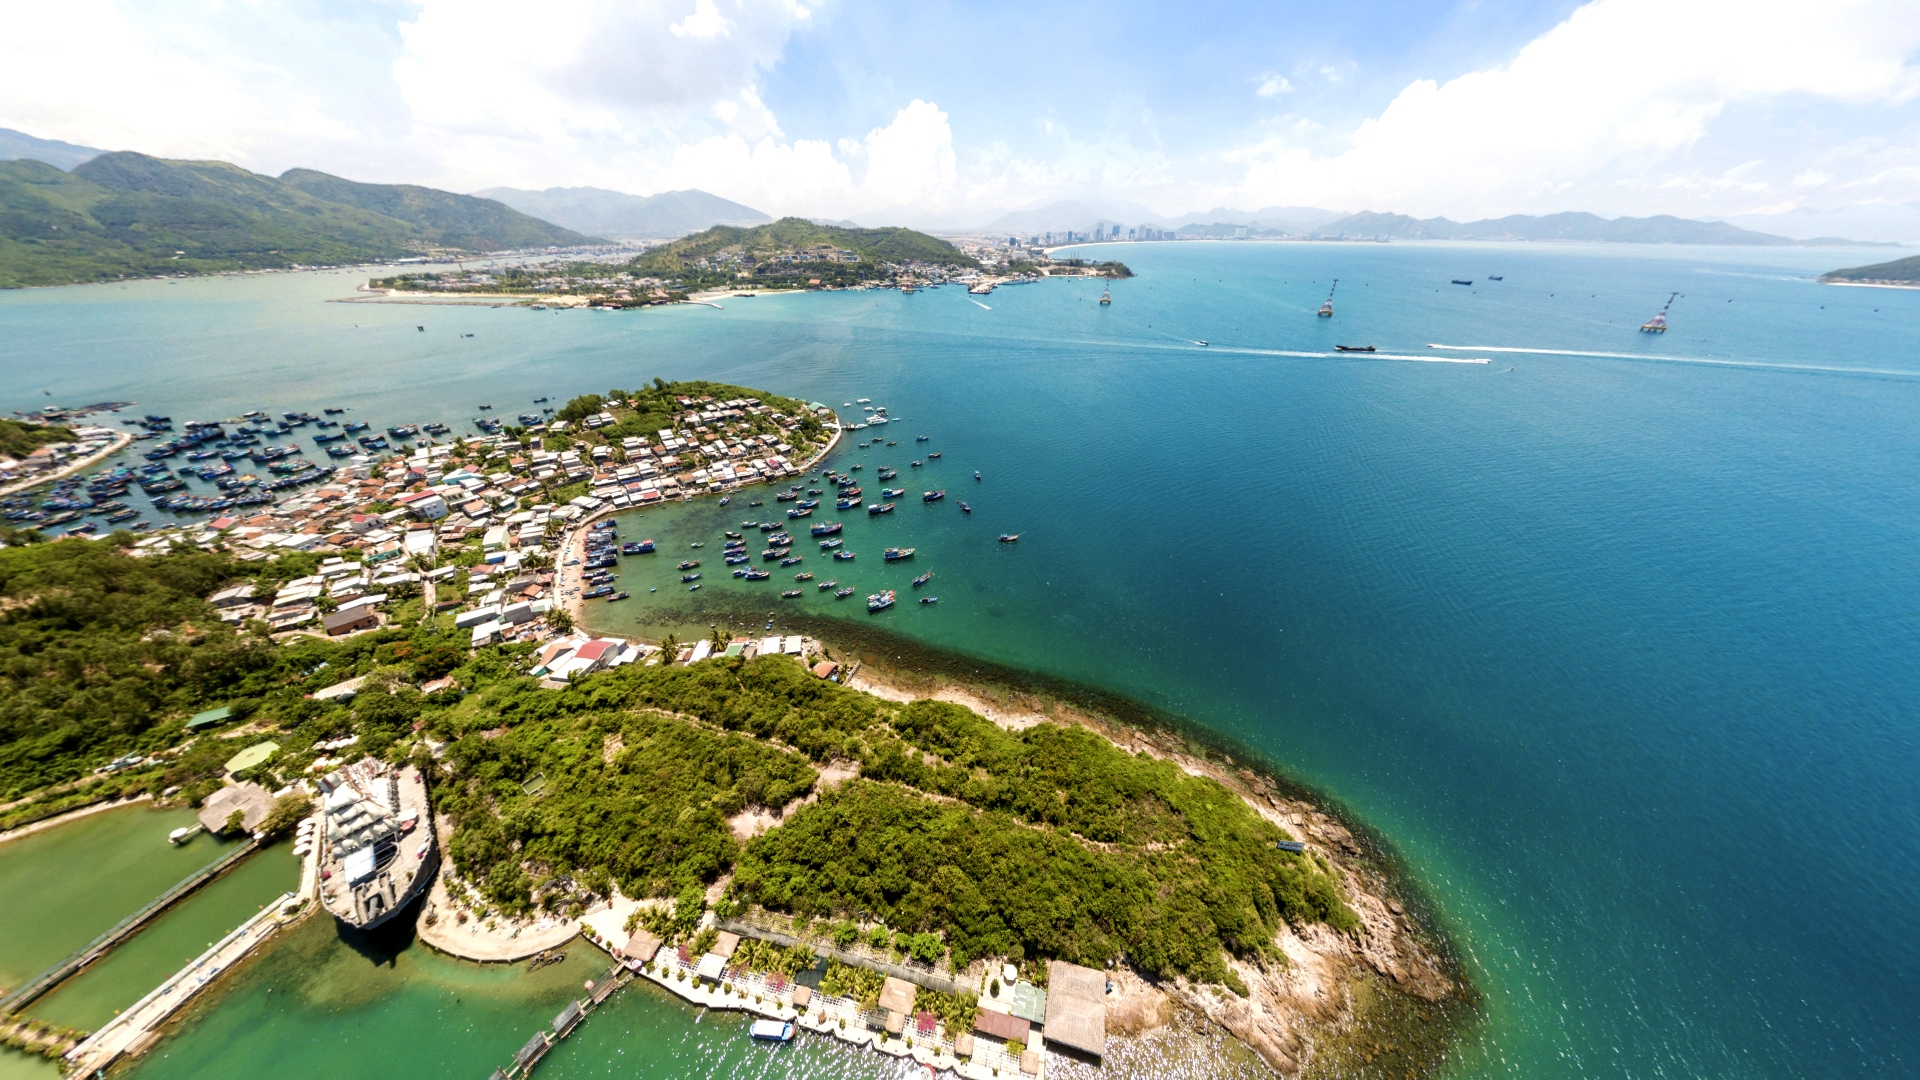 A panoramic view of Nha Trang Bay with mountains and islands